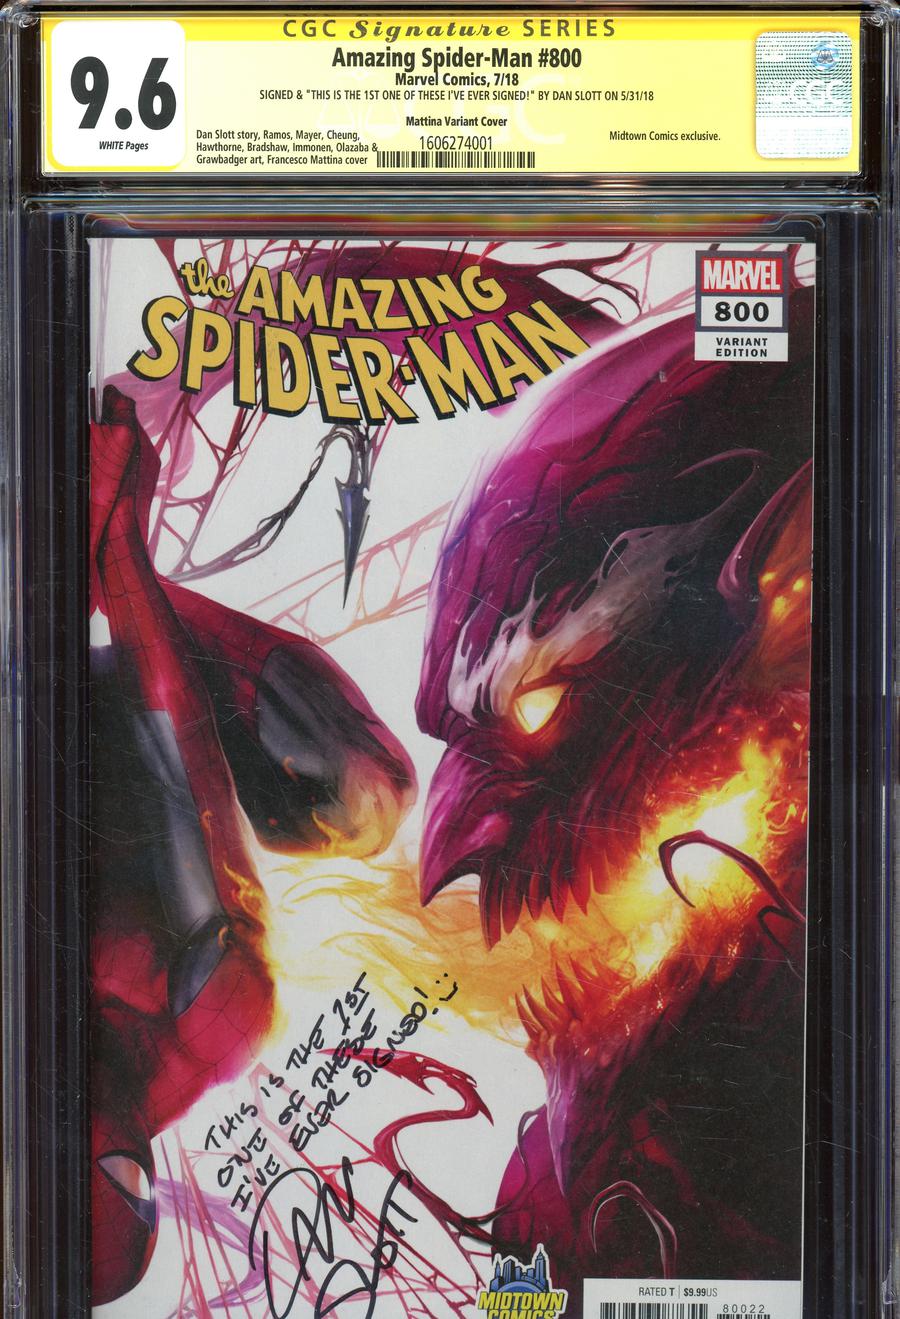 Amazing Spider-Man Vol 4 #800  Midtown Exclusive Francesco Mattina & Will Sliney Connecting Variant Cover Signed This Is The First Signed By Dan Slott